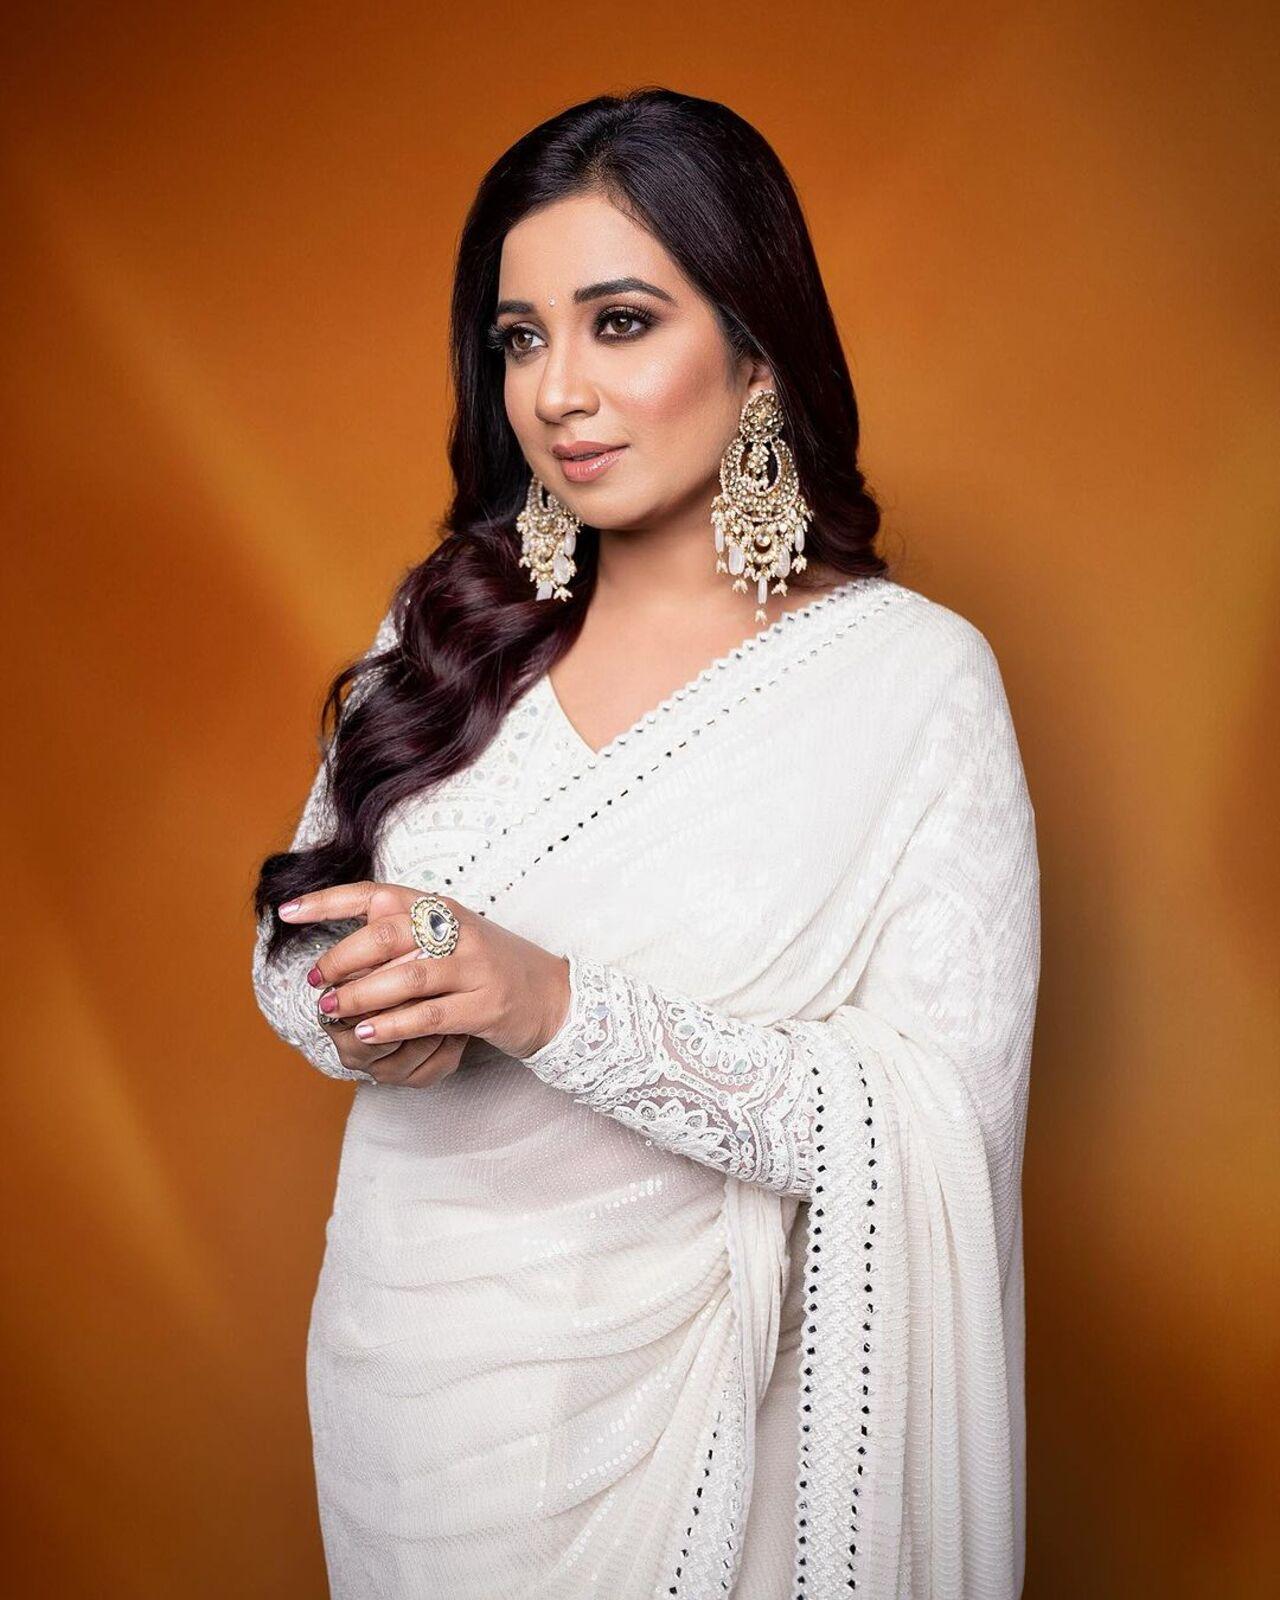 Shreya, who has charmed the world with her melodious voice looks like a vision in white. 